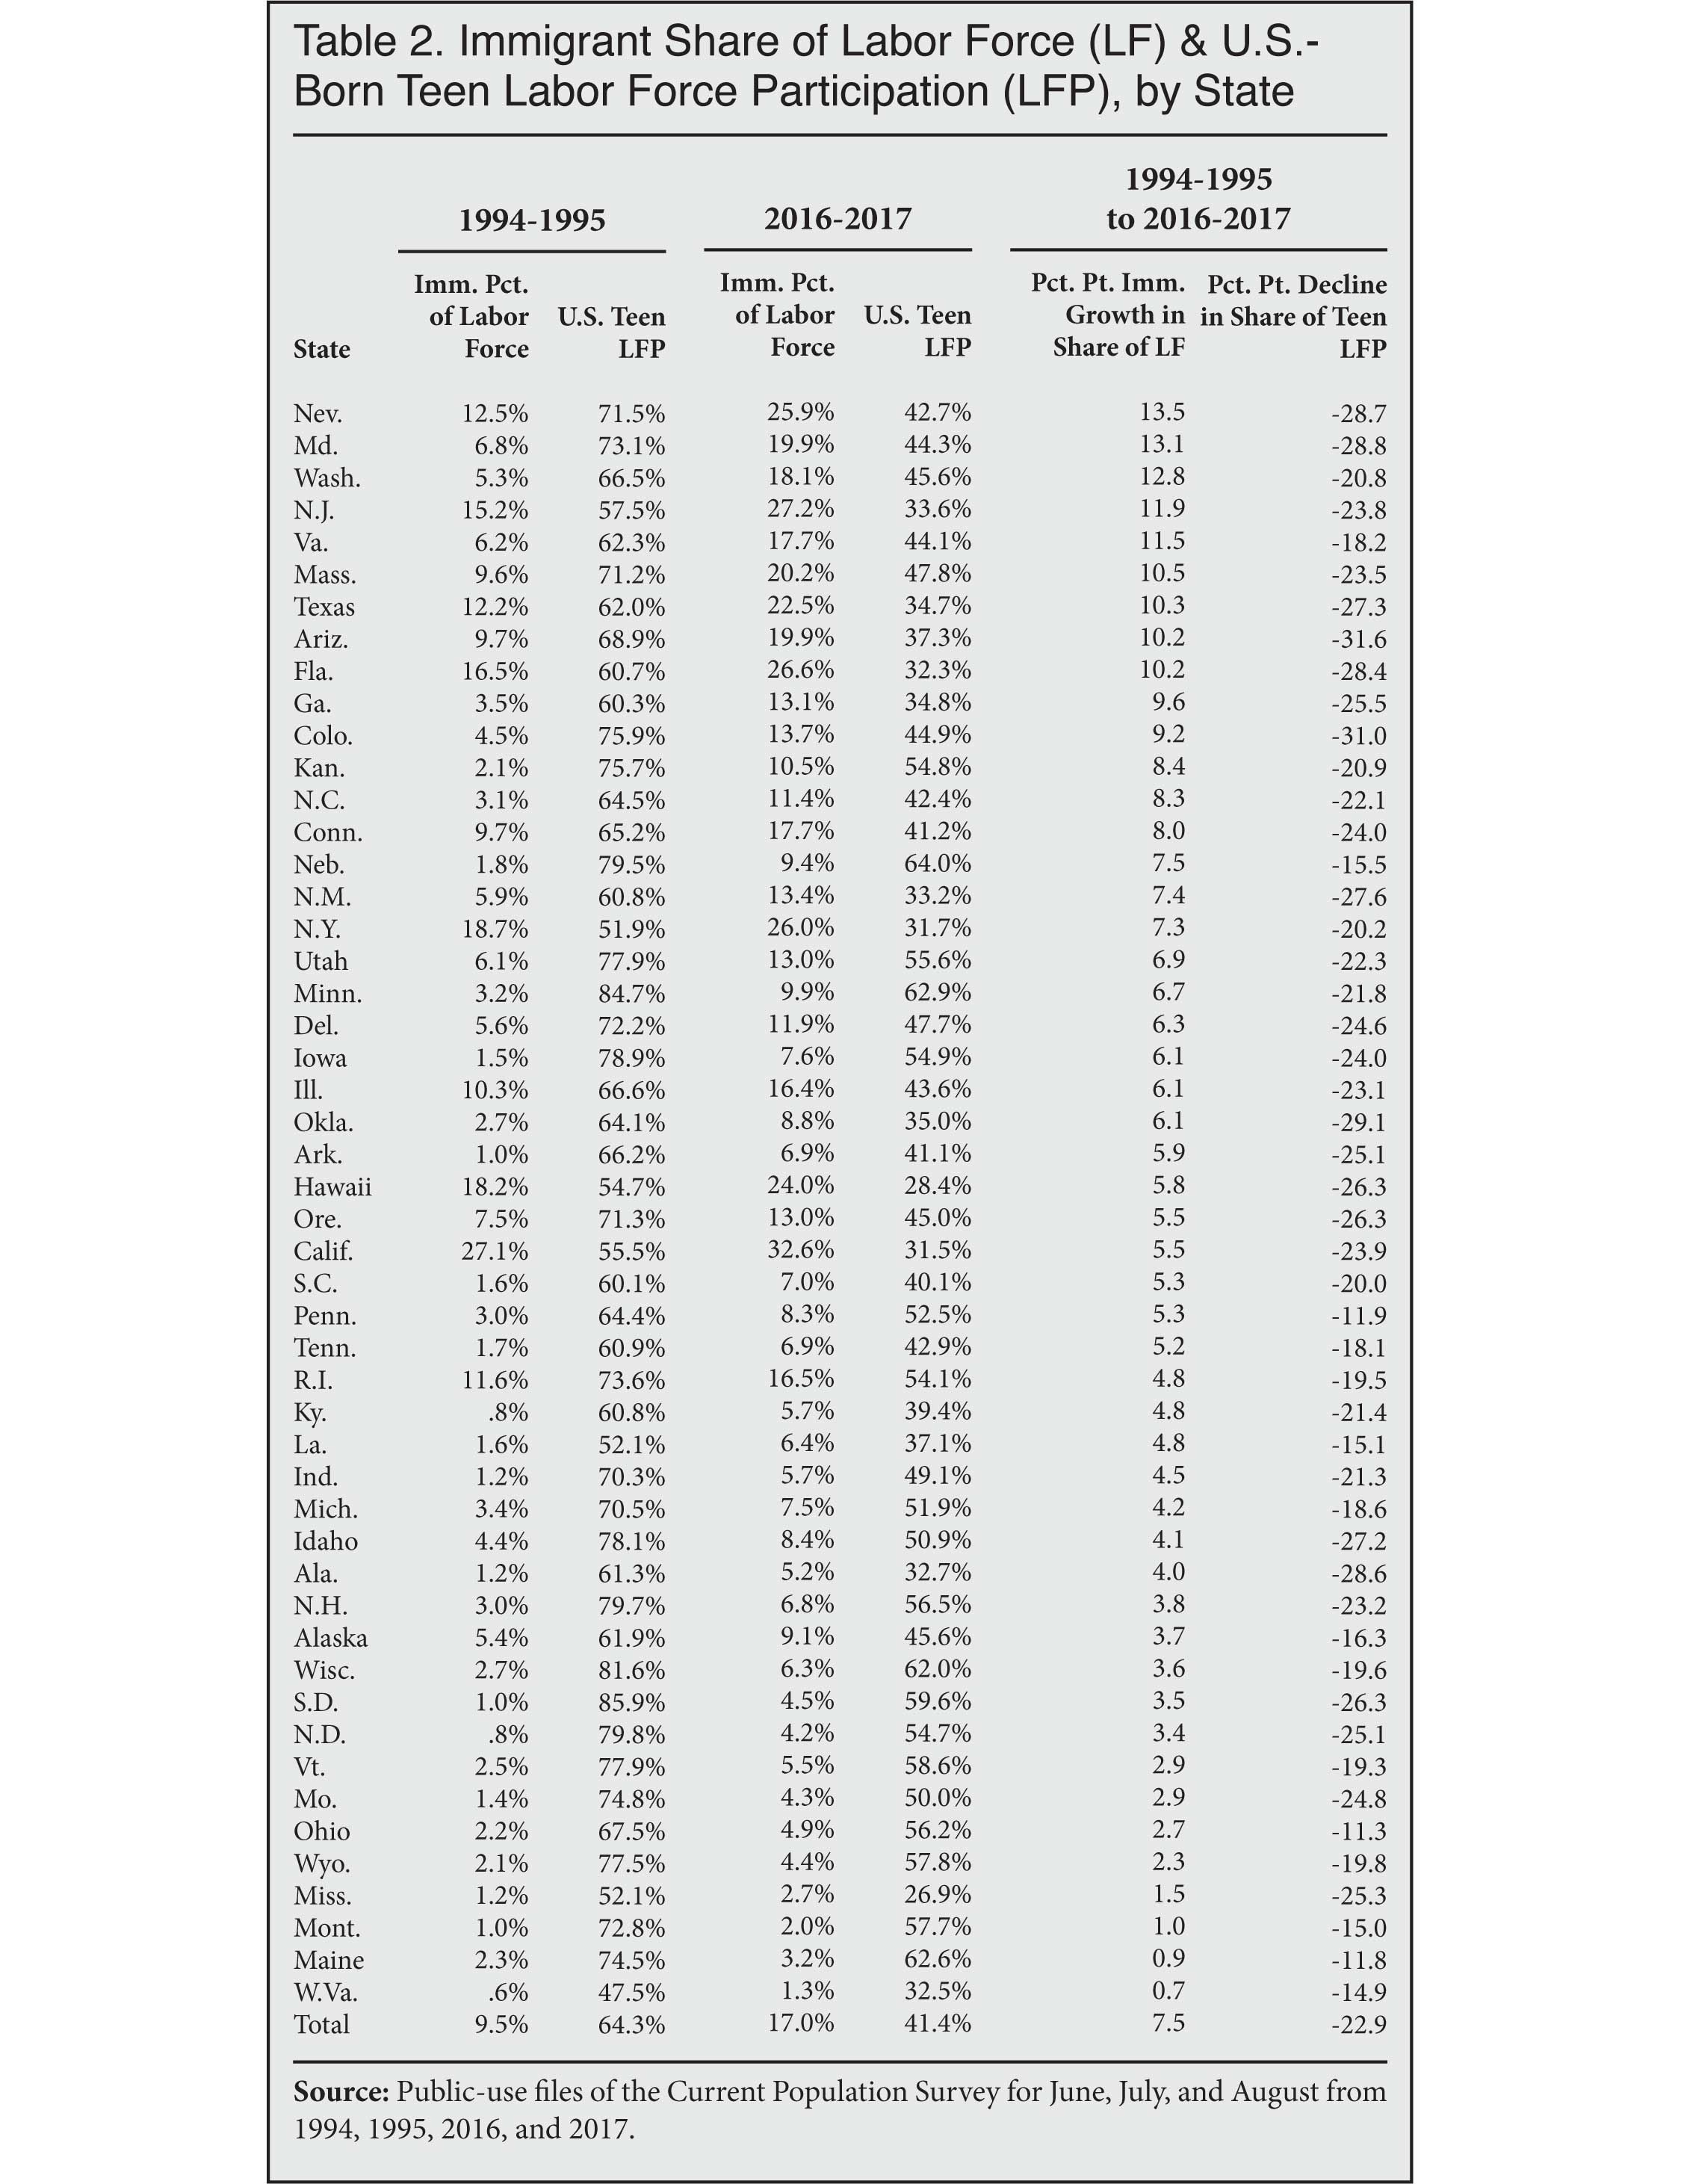 Table: Immigrant Share of Labor Force and US Born Teen Labor Force Participation, by State